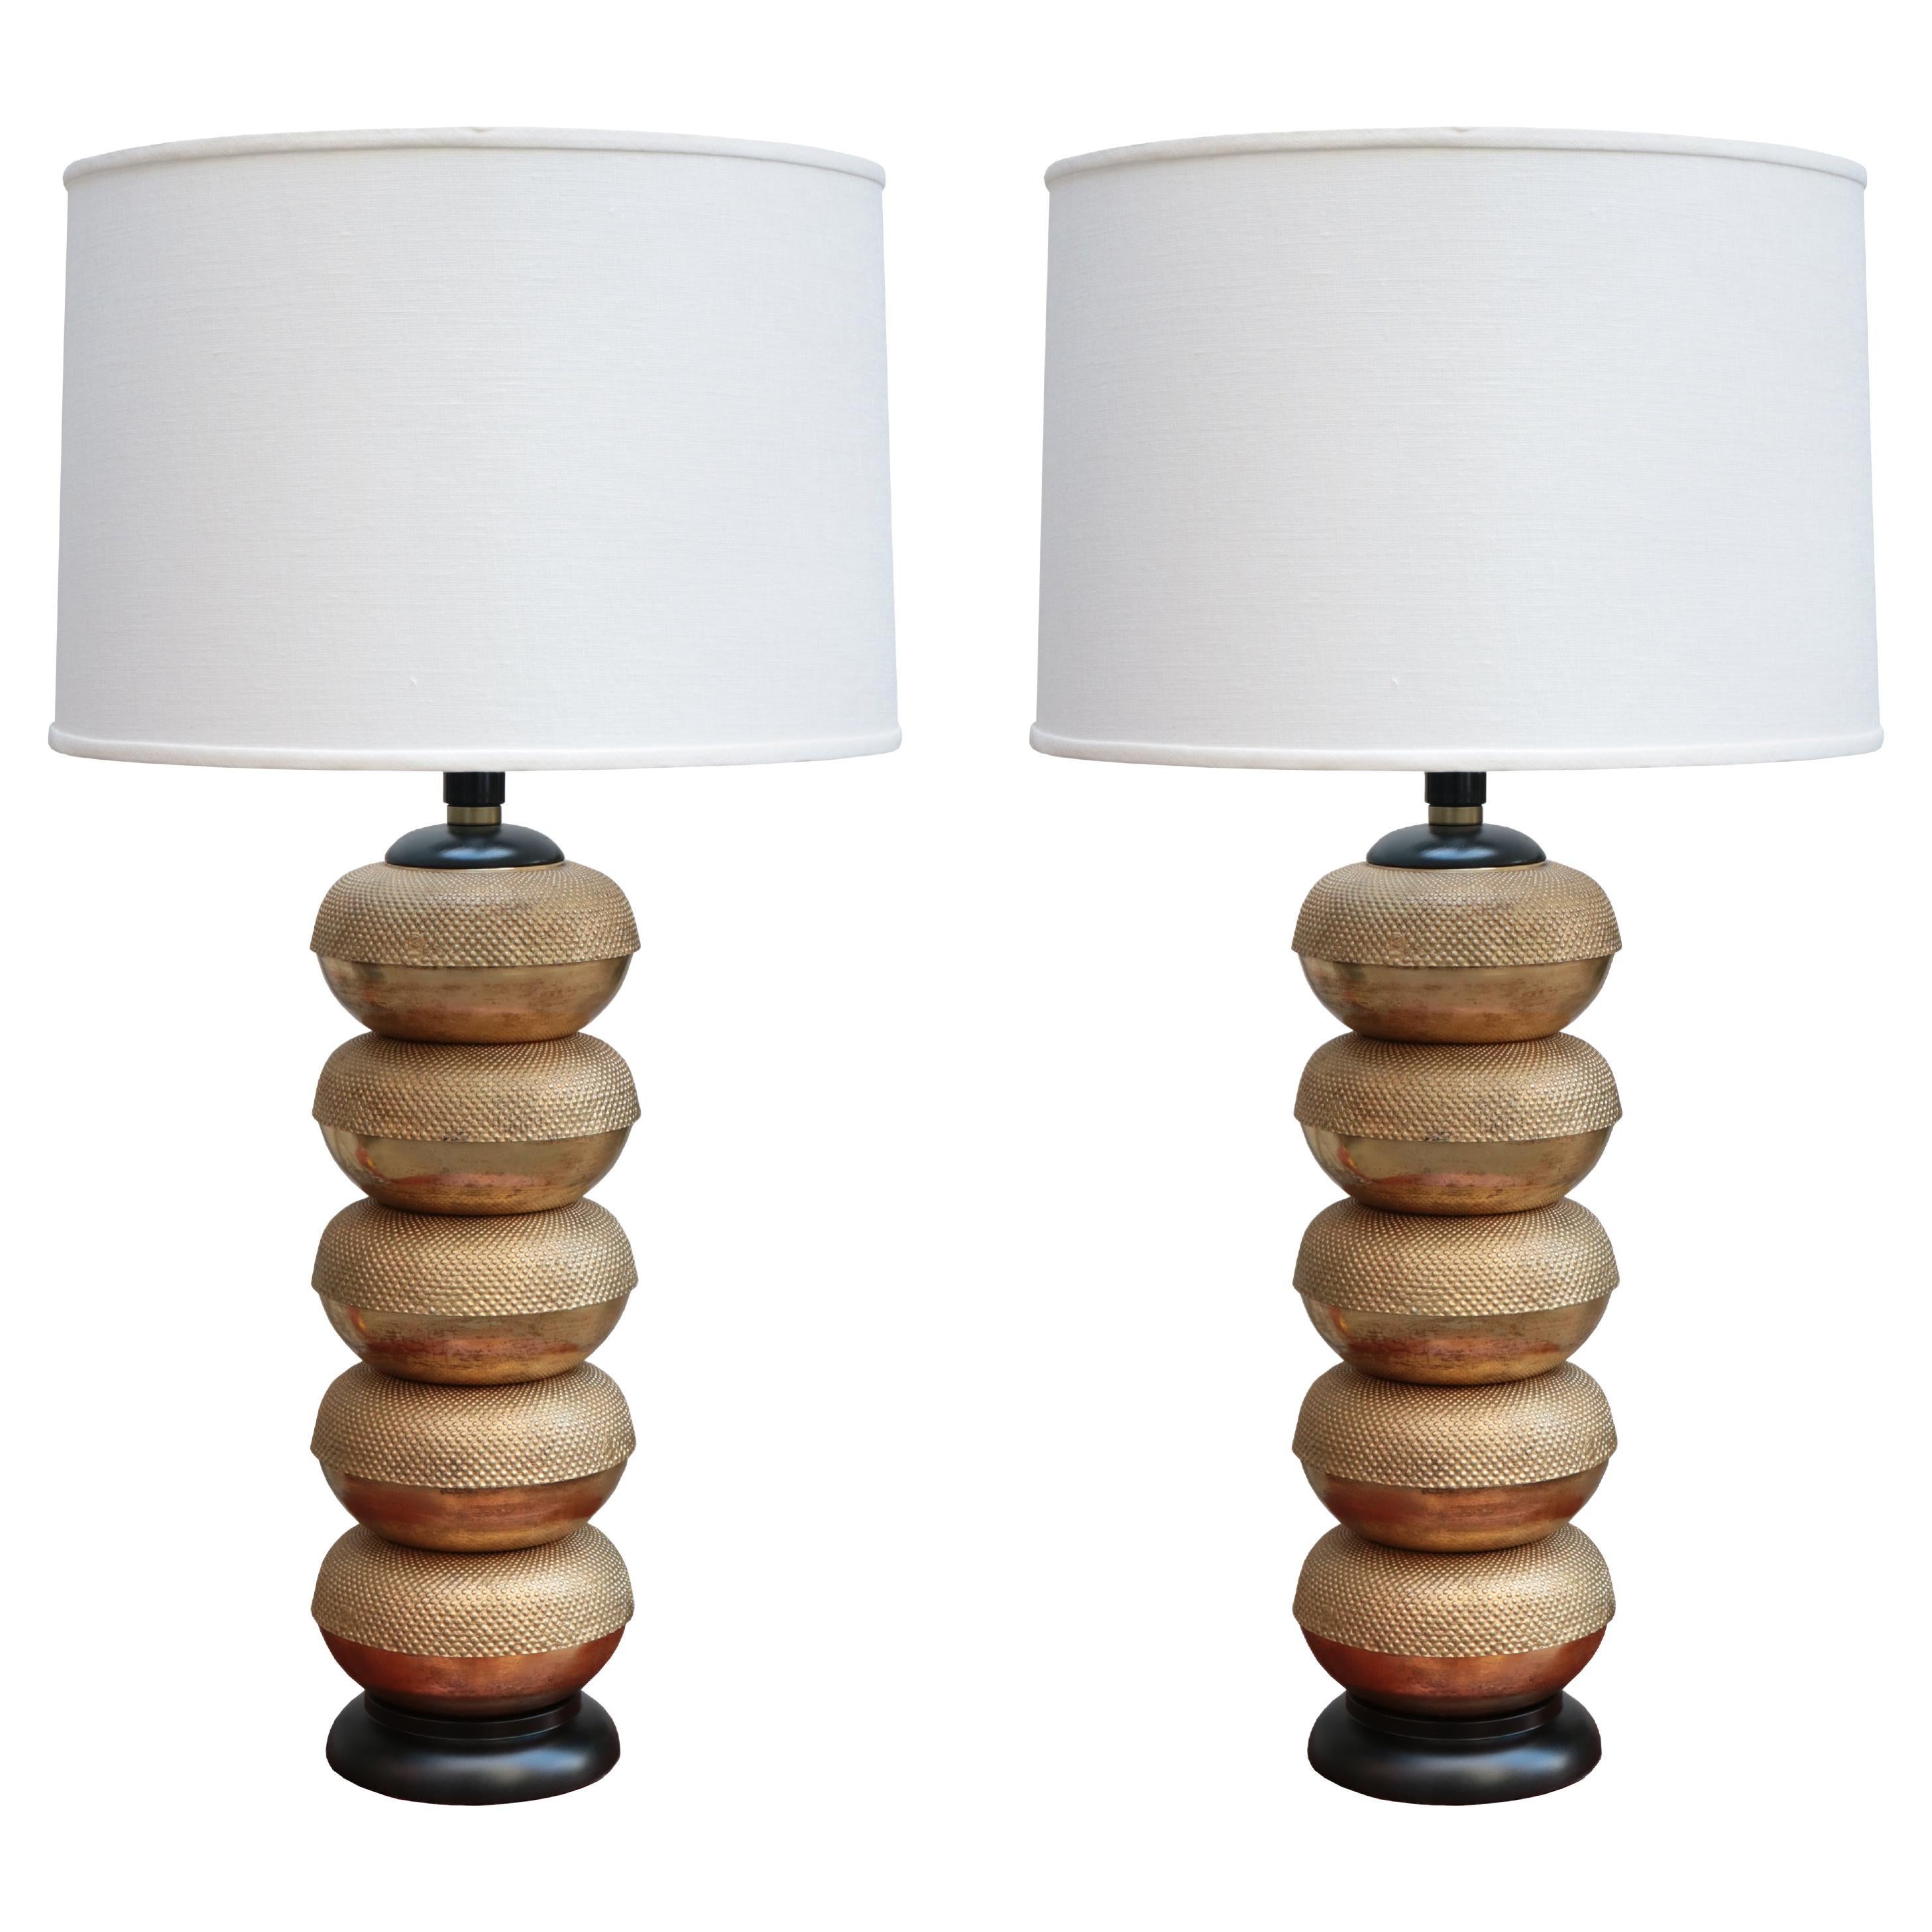 Pair of Modernist Table Lamps by Hansen